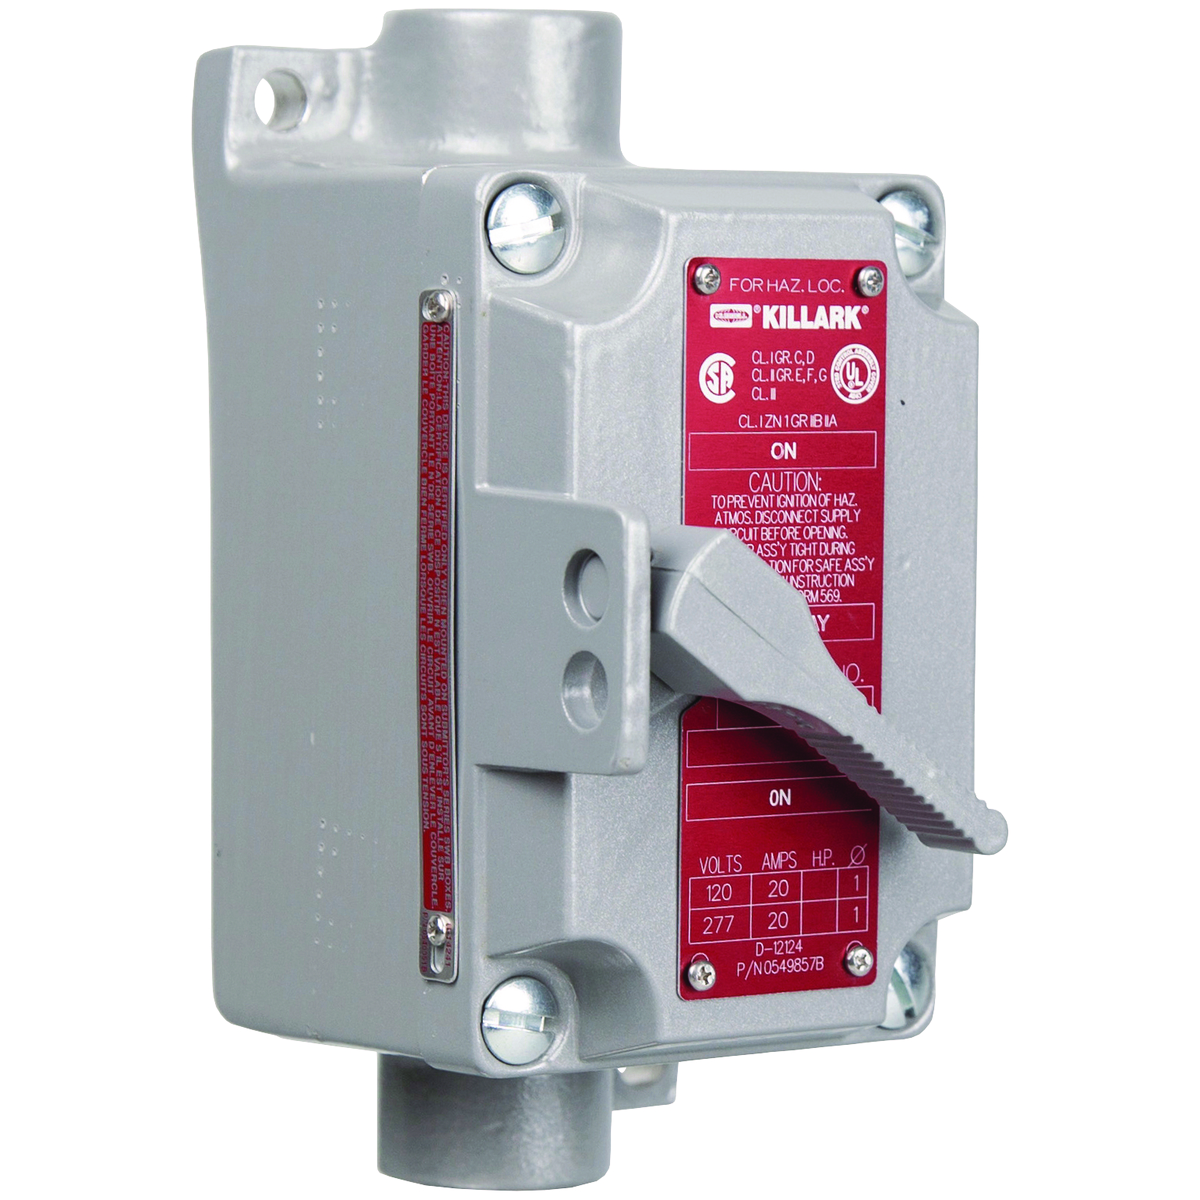 XS SERIES - ALUMINUM FEED-THRU BOX AND COVER WITH 2-POLE TUMBLER SWITCH- CONDUIT HUB SIZE 1/2 IN - 20 AMPS